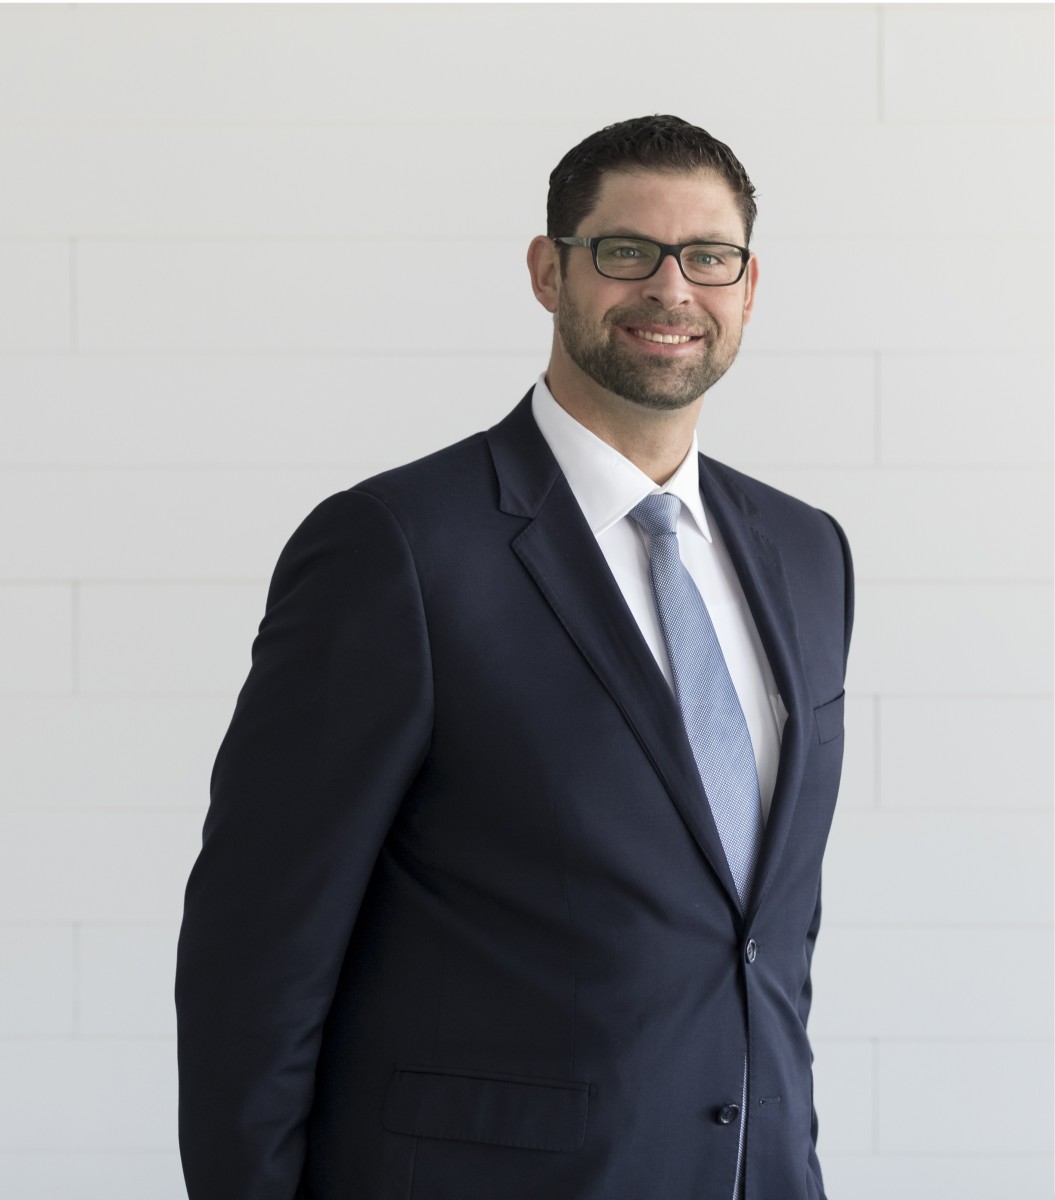 Joseph Mateja is an investment adviser representative for Rooted Wealth Advisors. He specializes in life insurance, retirement planning and business 401(k)s. He has worked in the financial industry for 12 years and has certifications from the Series 6, 26, 63 and 65 exams.